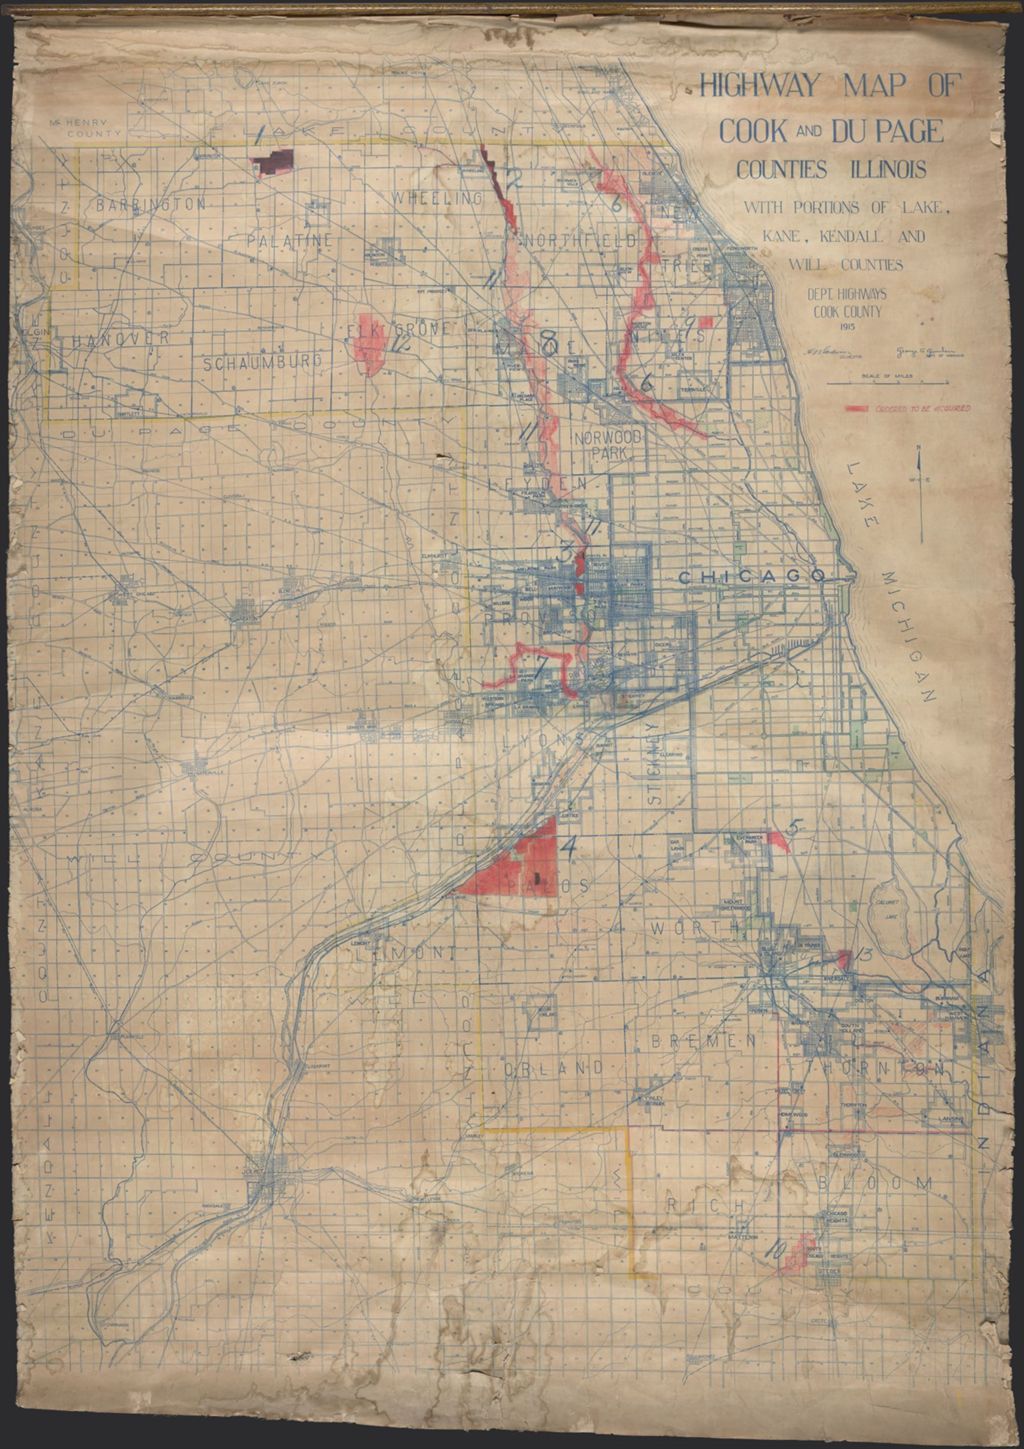 Original Working Map used by Dwight Perkins, re: Recommended Acquisitions for initial Forest Preserve District